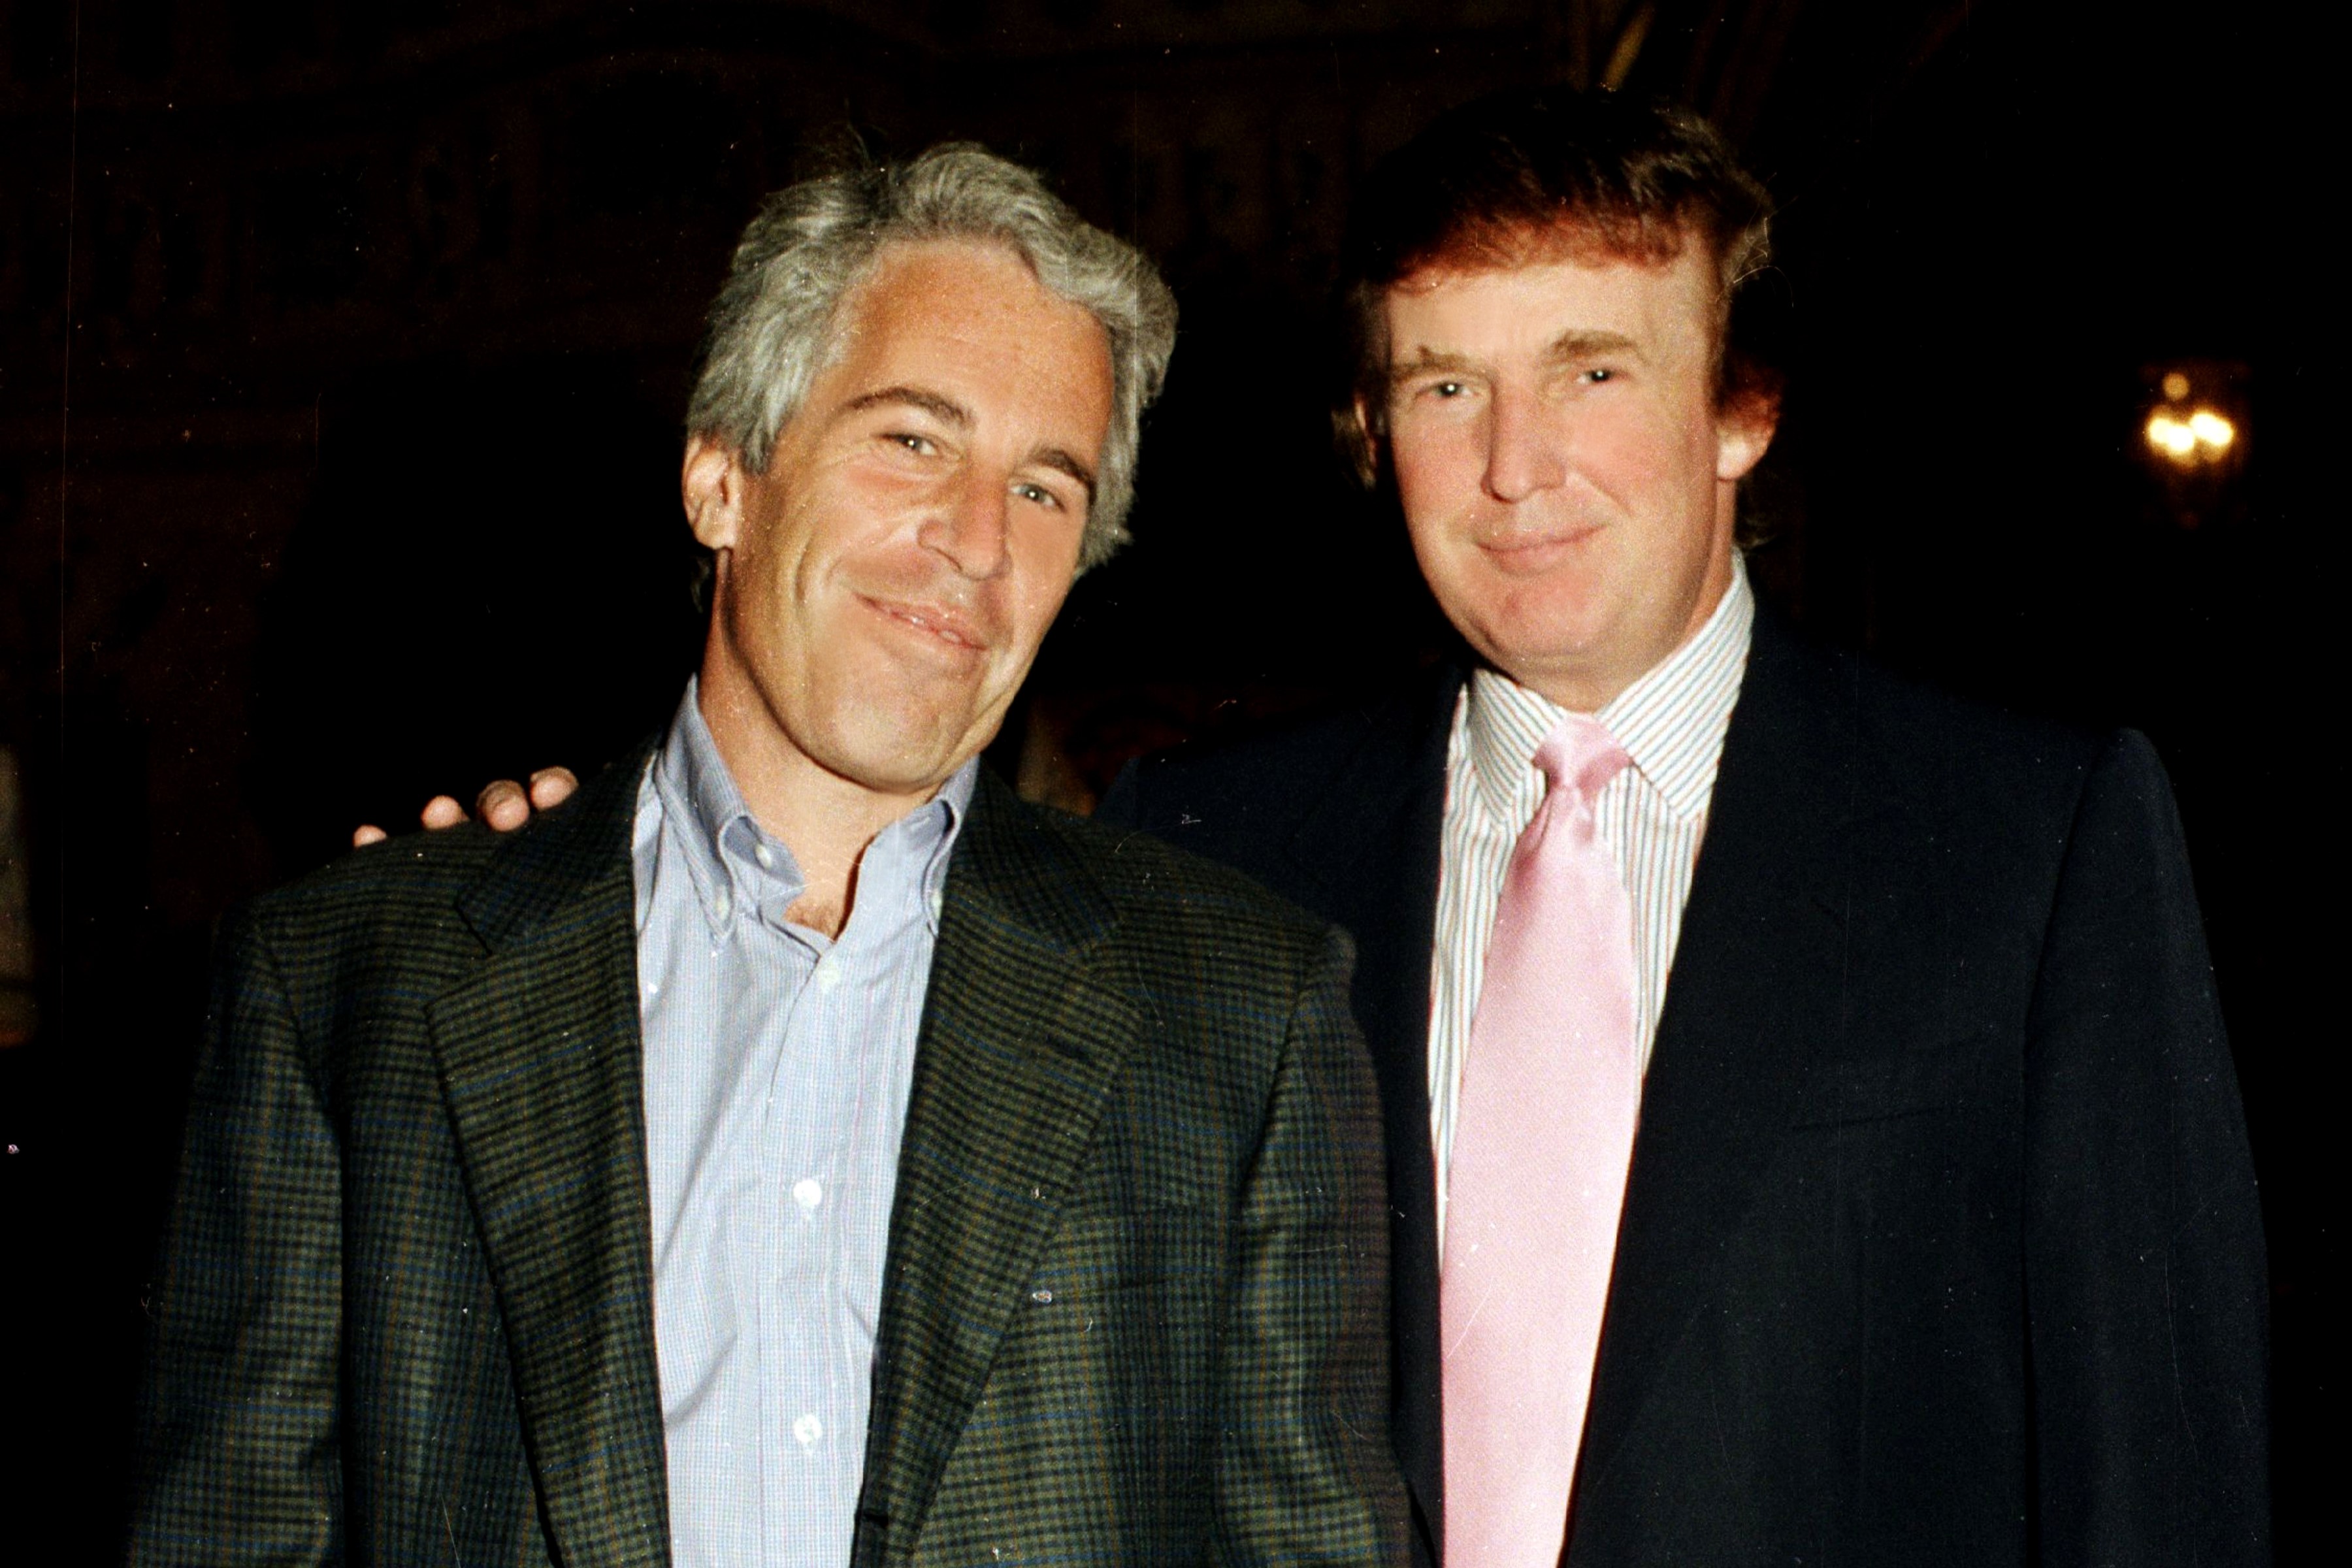 Jeffrey Epstein List Release Sparks Donald Trump Conspiracy Theory